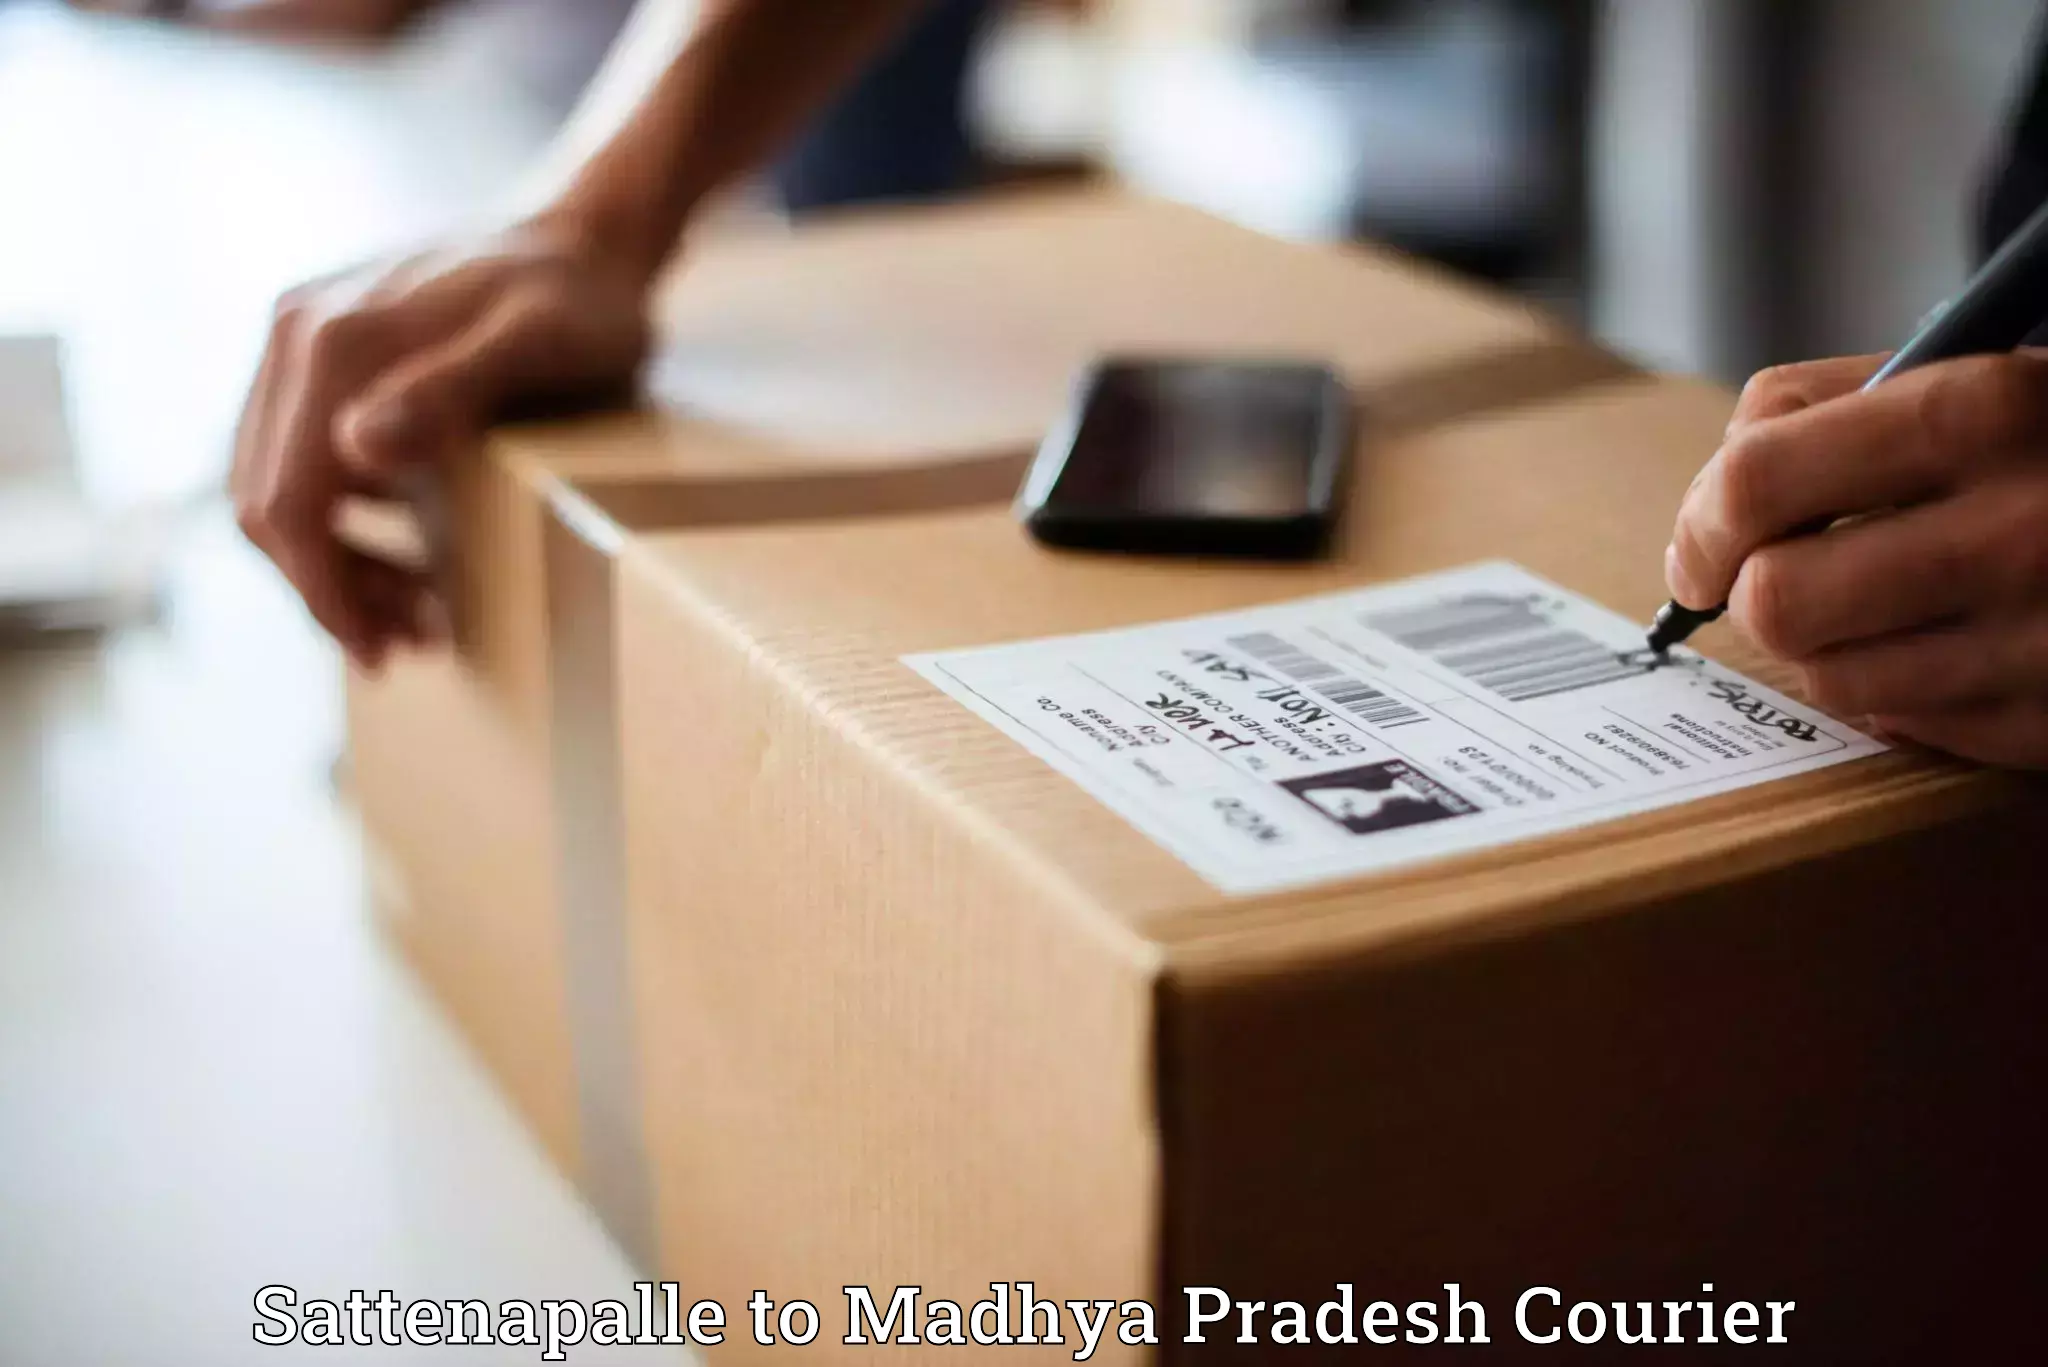 Expedited parcel delivery in Sattenapalle to Vidisha